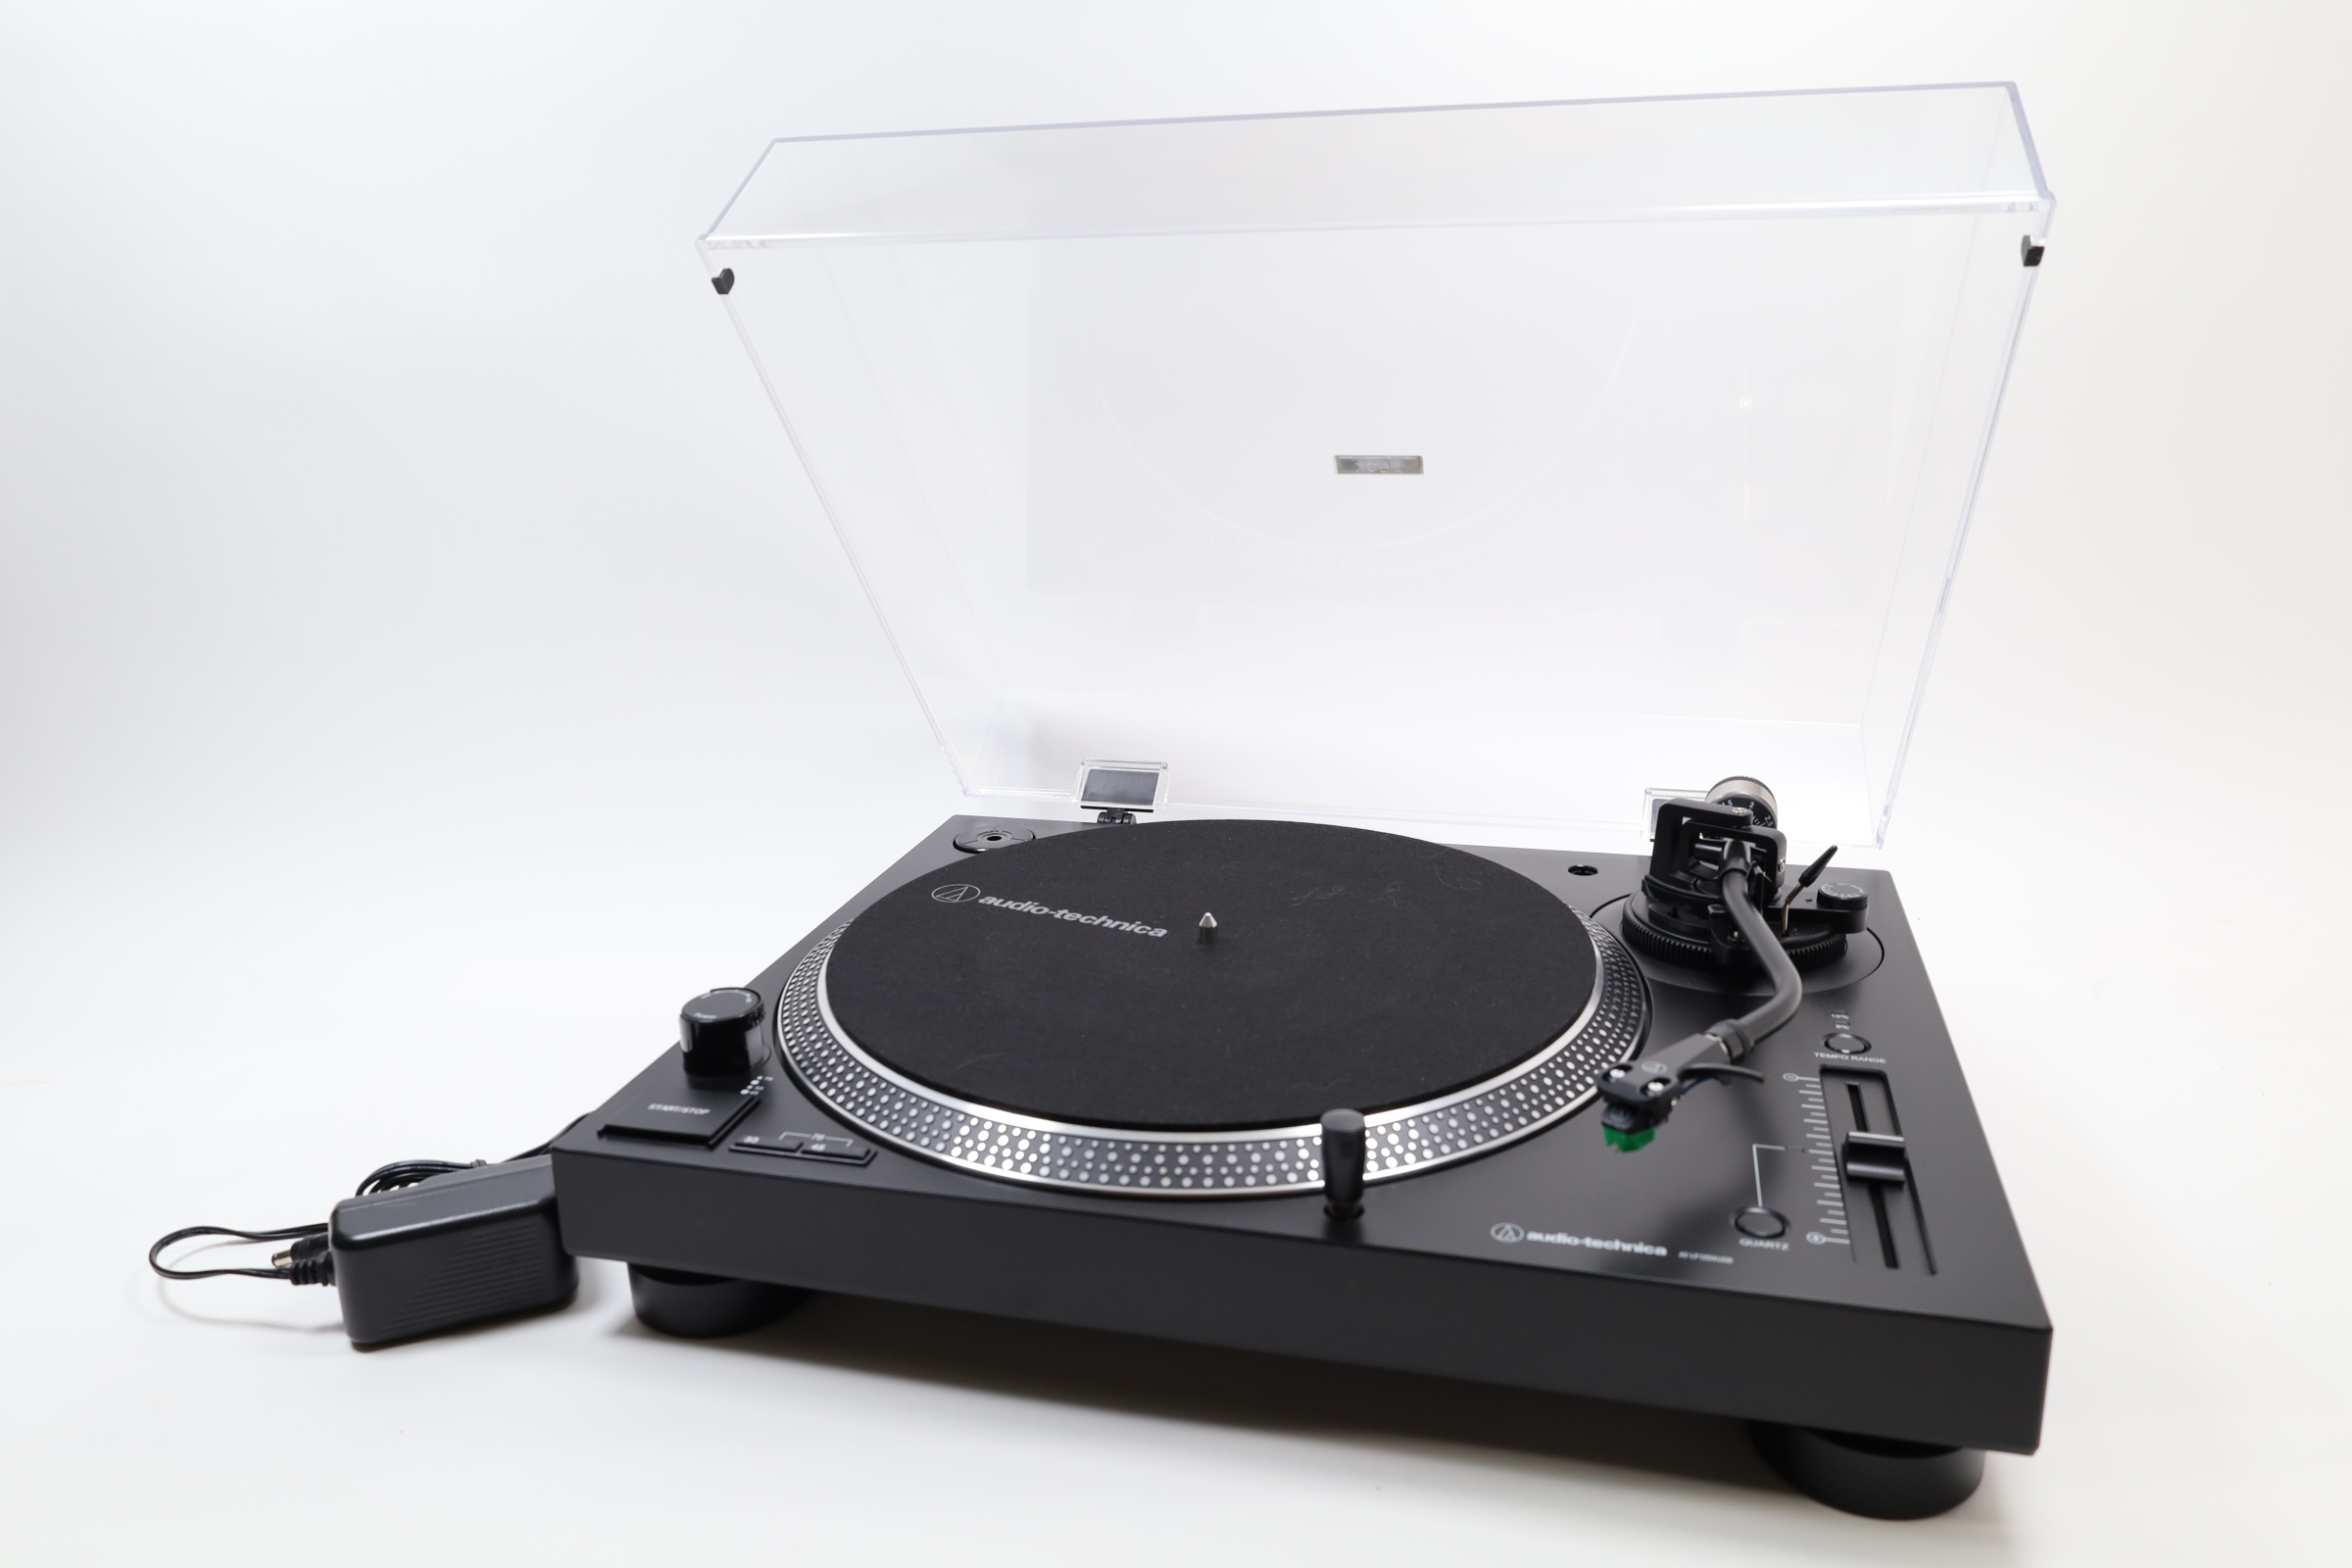 Good & bad things about the Audio Technica LP-120XUSB turntable 